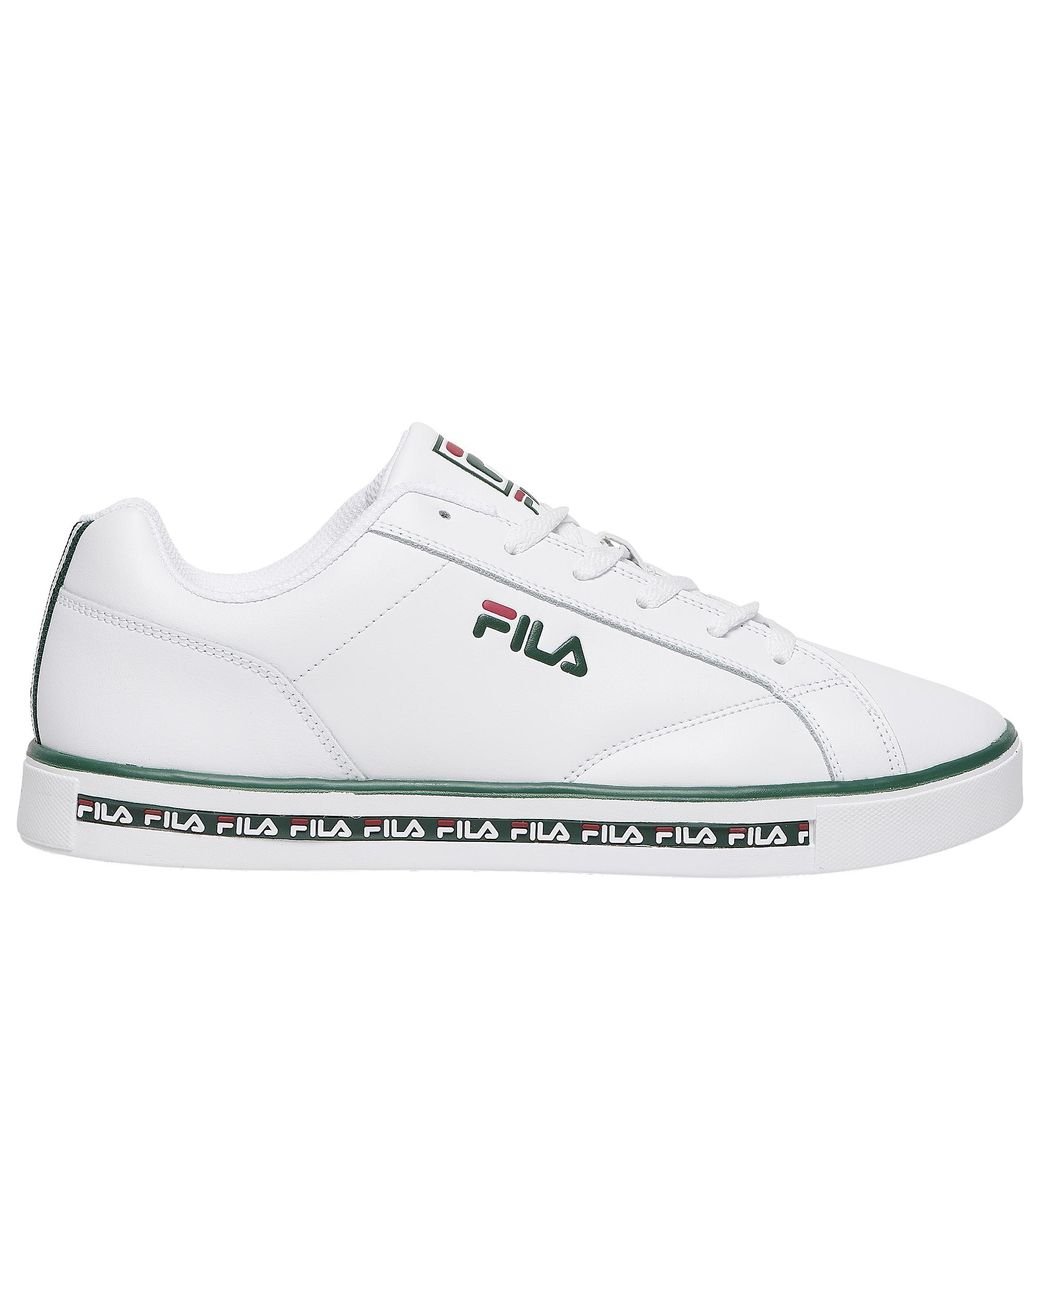 Fila Synthetic Og Court Training Shoes in White/Green/Red (White) for ...